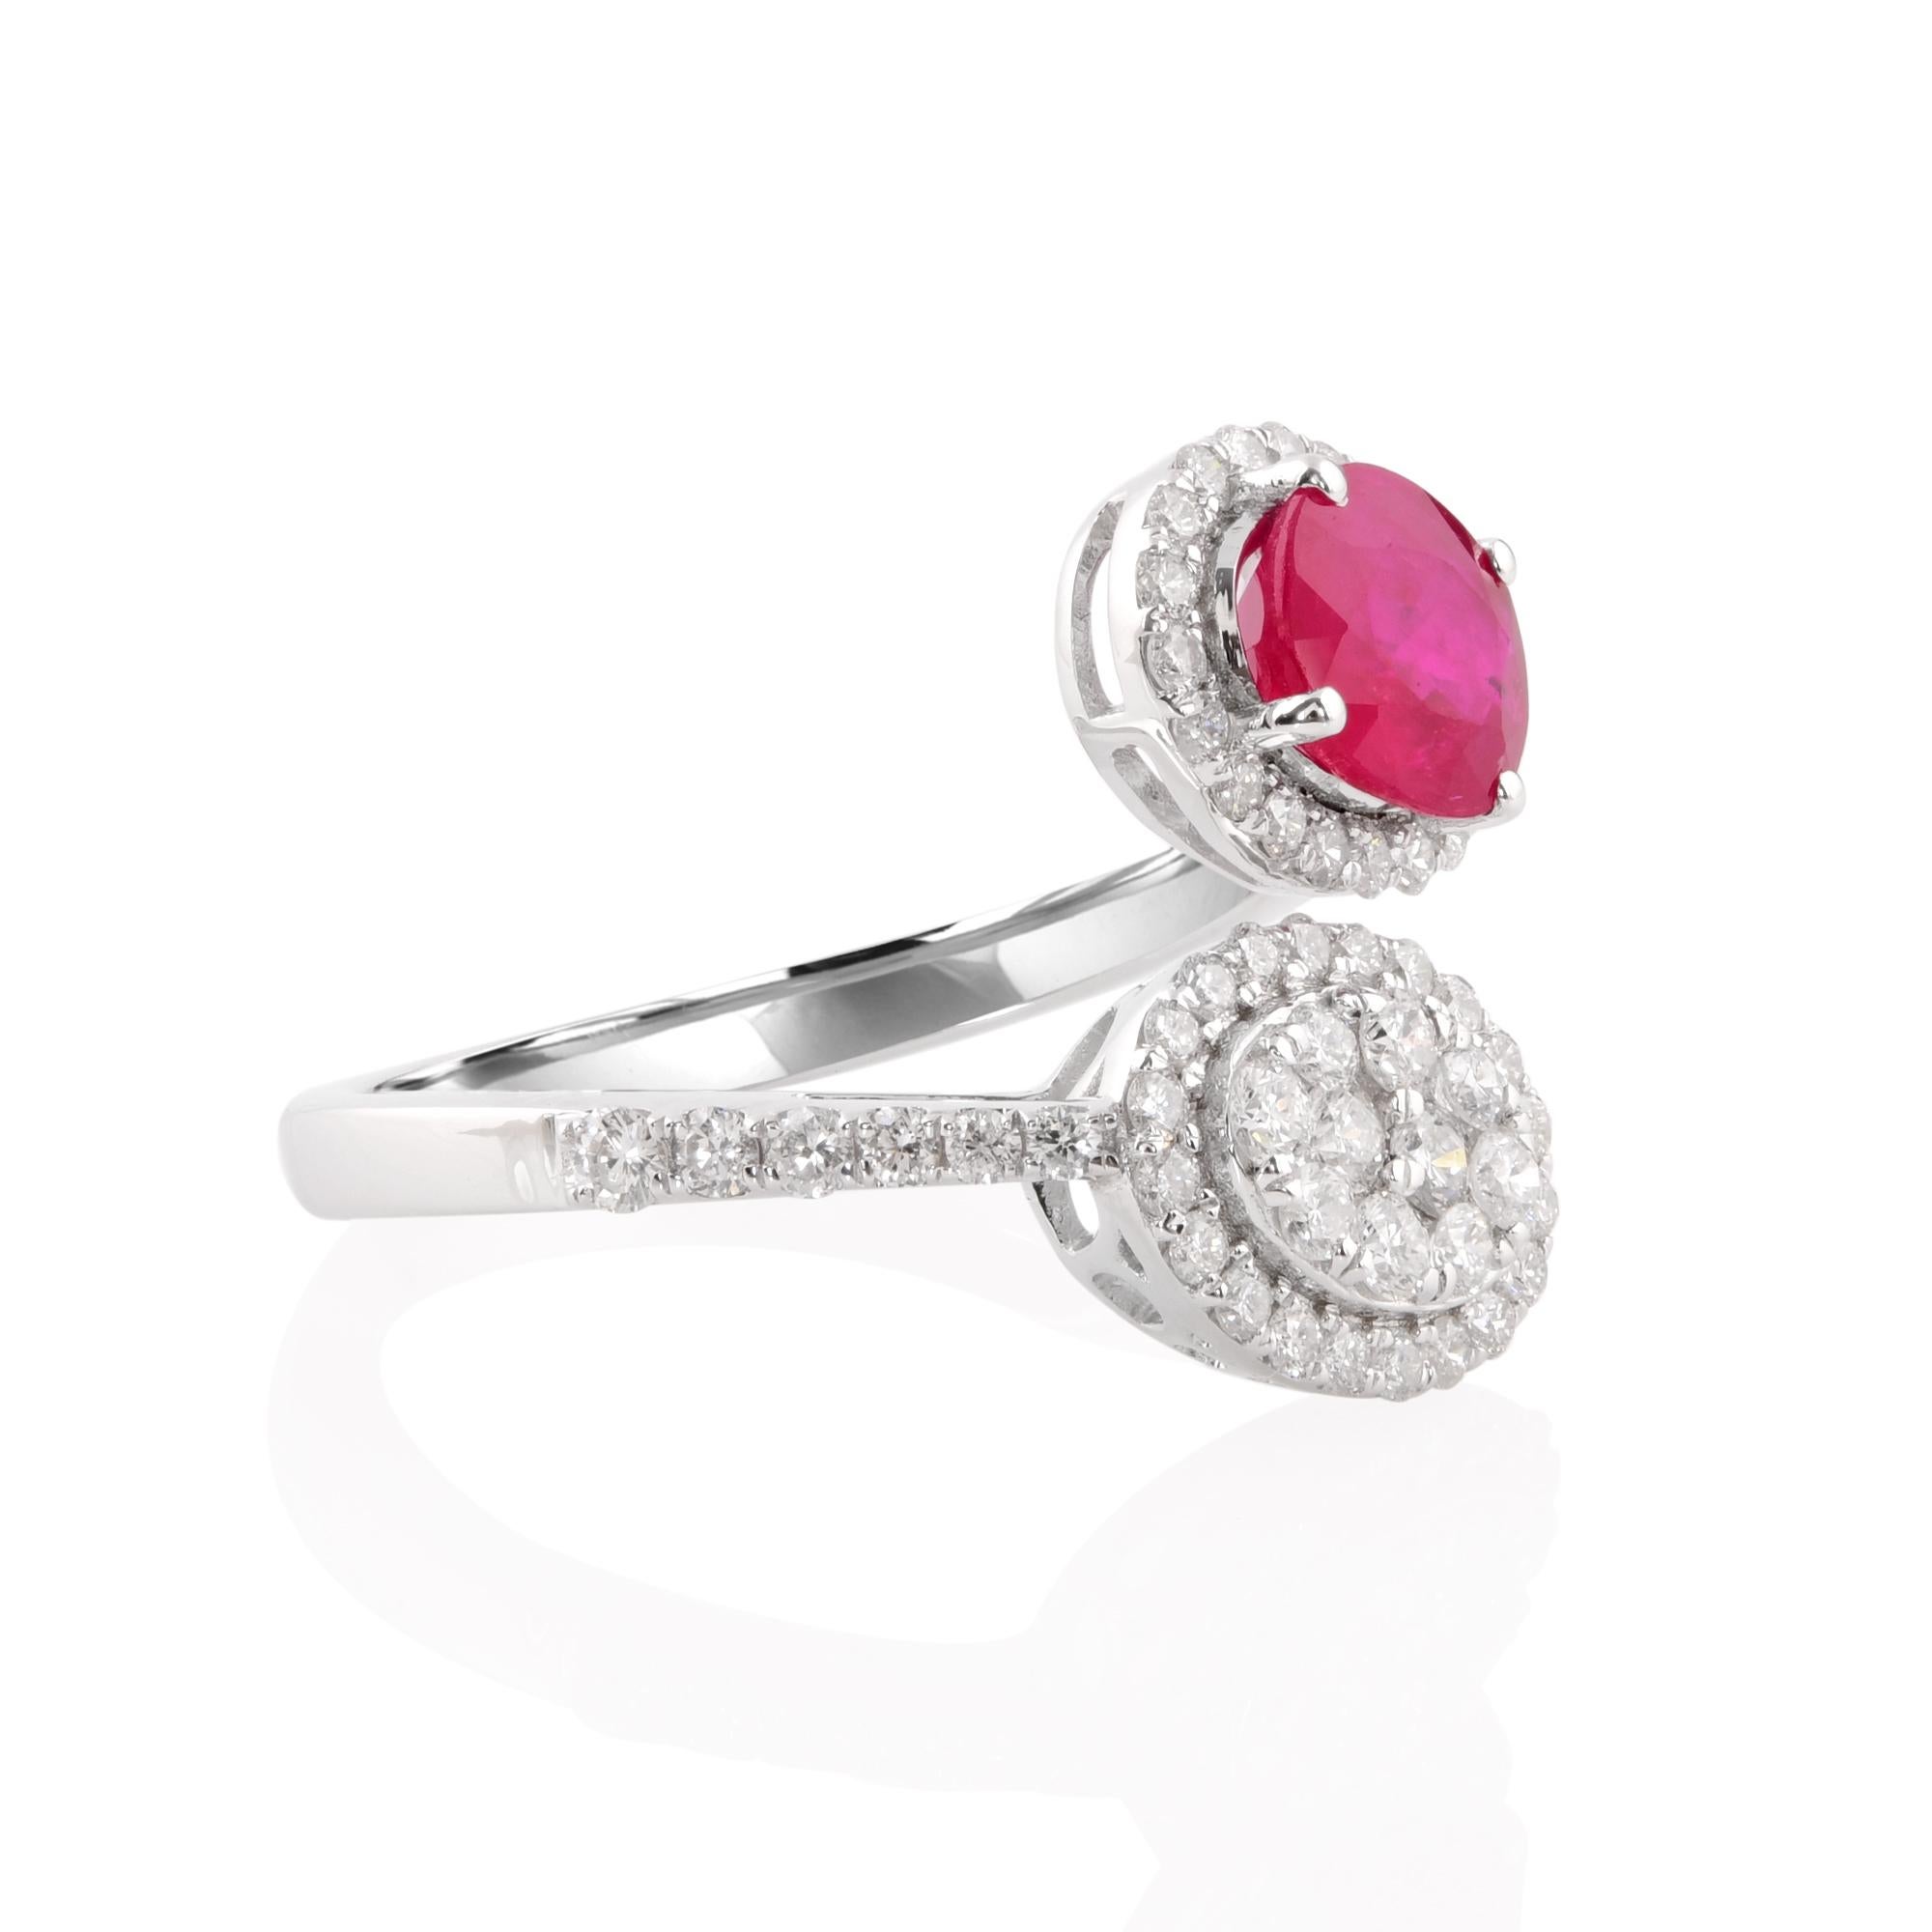 Indulge in the timeless allure of fine jewelry with this exquisite Natural Ruby Gemstone Wrap Ring, accented with sparkling diamonds and crafted in luxurious 14 karat white gold. This stunning piece is a true testament to sophistication and